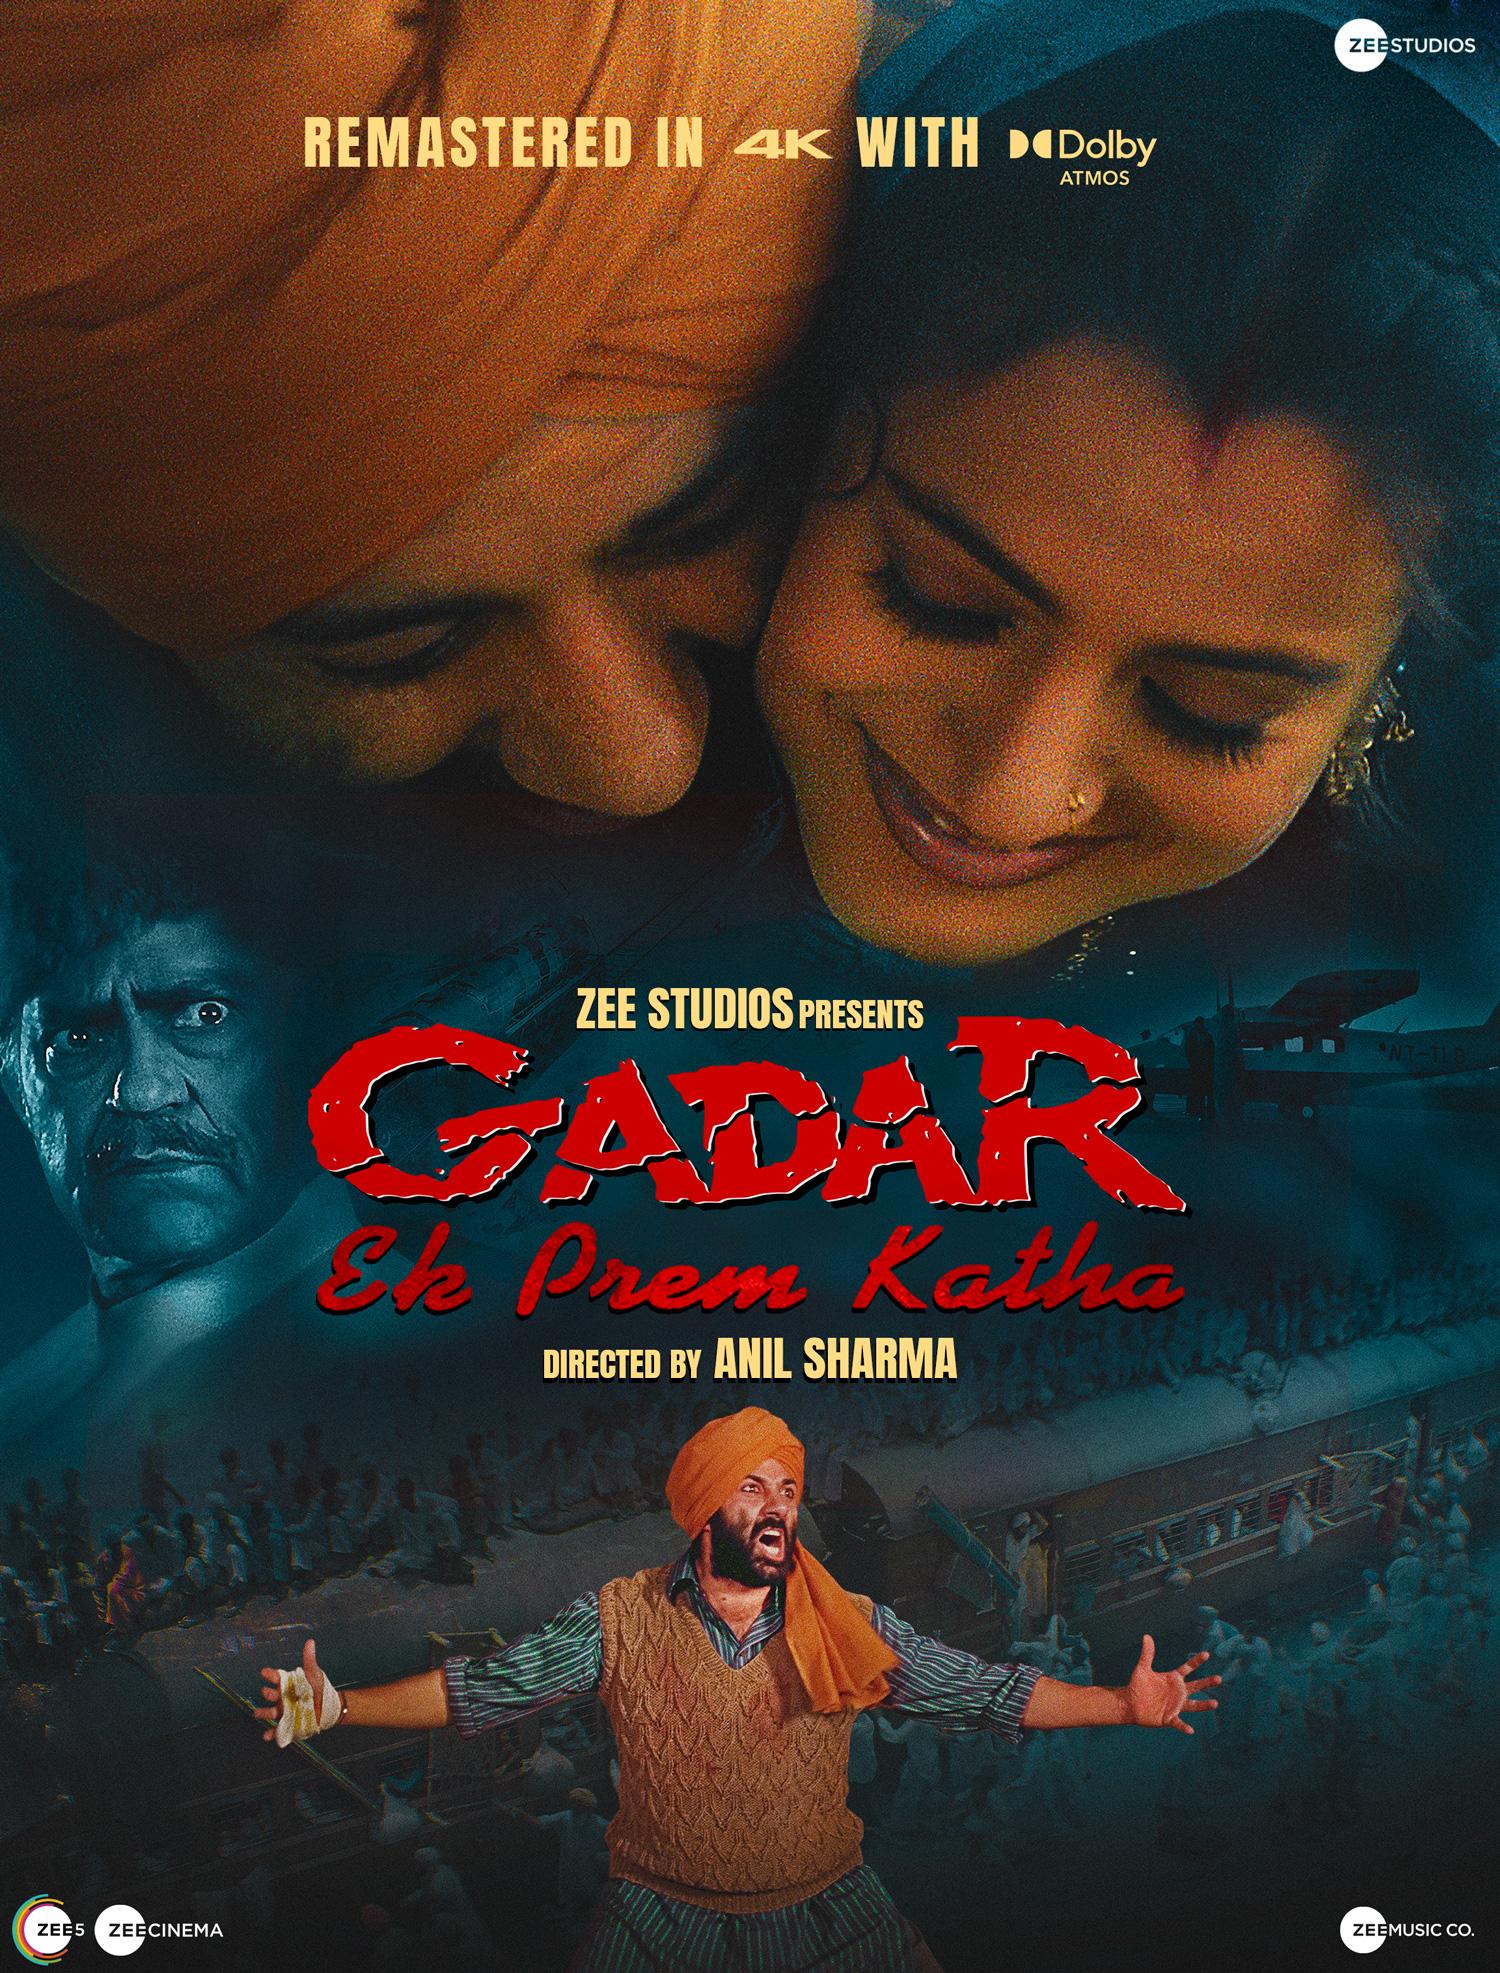 Gadar: Ek Prem Katha (2001) beautifully portrays a compelling cross-cultural love story against the backdrop of India's partition. Tara Singh (played by Sunny Deol), a Sikh truck driver, falls deeply in love with Sakina (portrayed by Amisha Patel), a Muslim woman, despite the religious divide that plagues the nation.